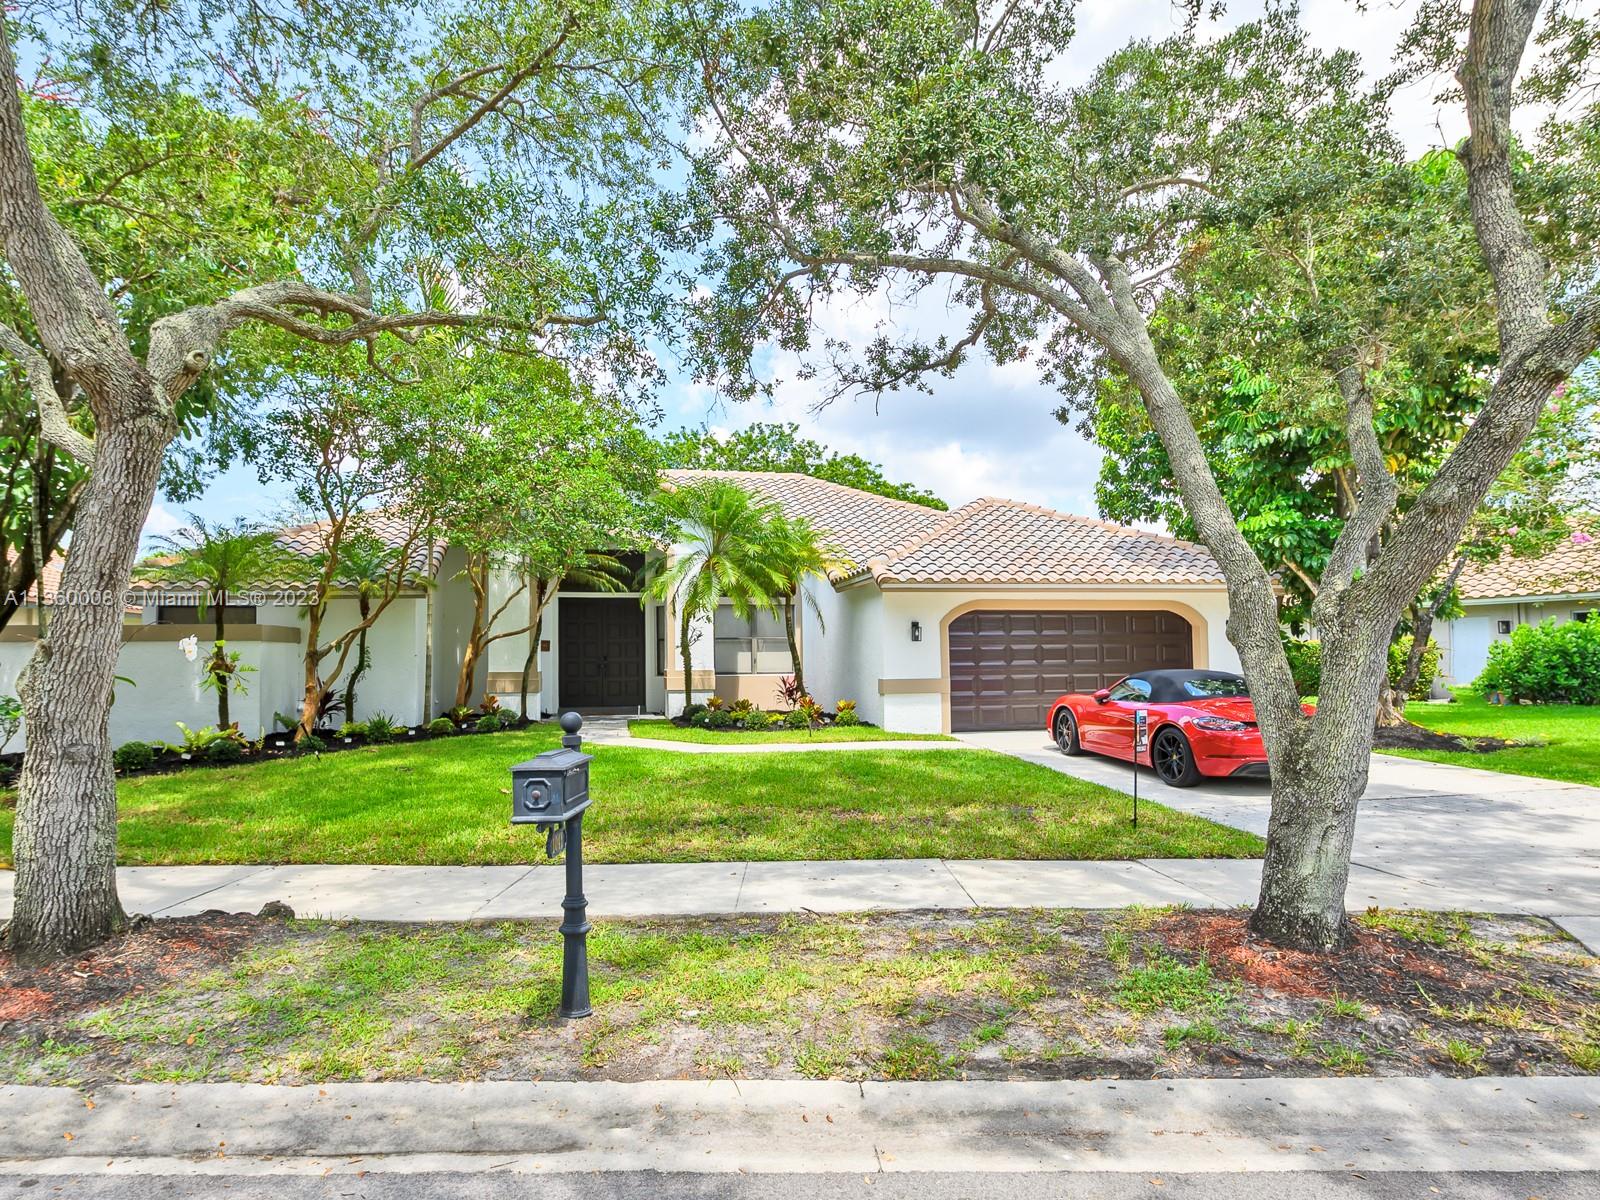 Owner relocating. Impeccable upscale living in this beautiful, newly renovated home in Tequesta; one of the most desirable communities in Weston. 
The Split floor plan makes the house spacious and very comfortable. Freshly painted inside and out, and new high quality flooring. 
A completely new and functional kitchen is at the heart of this beautiful home. Enjoy cooking with plenty of counter space and brand new appliances.
Newly remodeled master bathroom and brand new light fixtures throughout the house.
A large screened in patio for you to enjoy a poolside view of the most beautiful lake in the community. 
The roof from 2009 is in perfect condition. 
If you are ready to live the exquisite Weston Florida lifestyle, you have come to the perfect place.